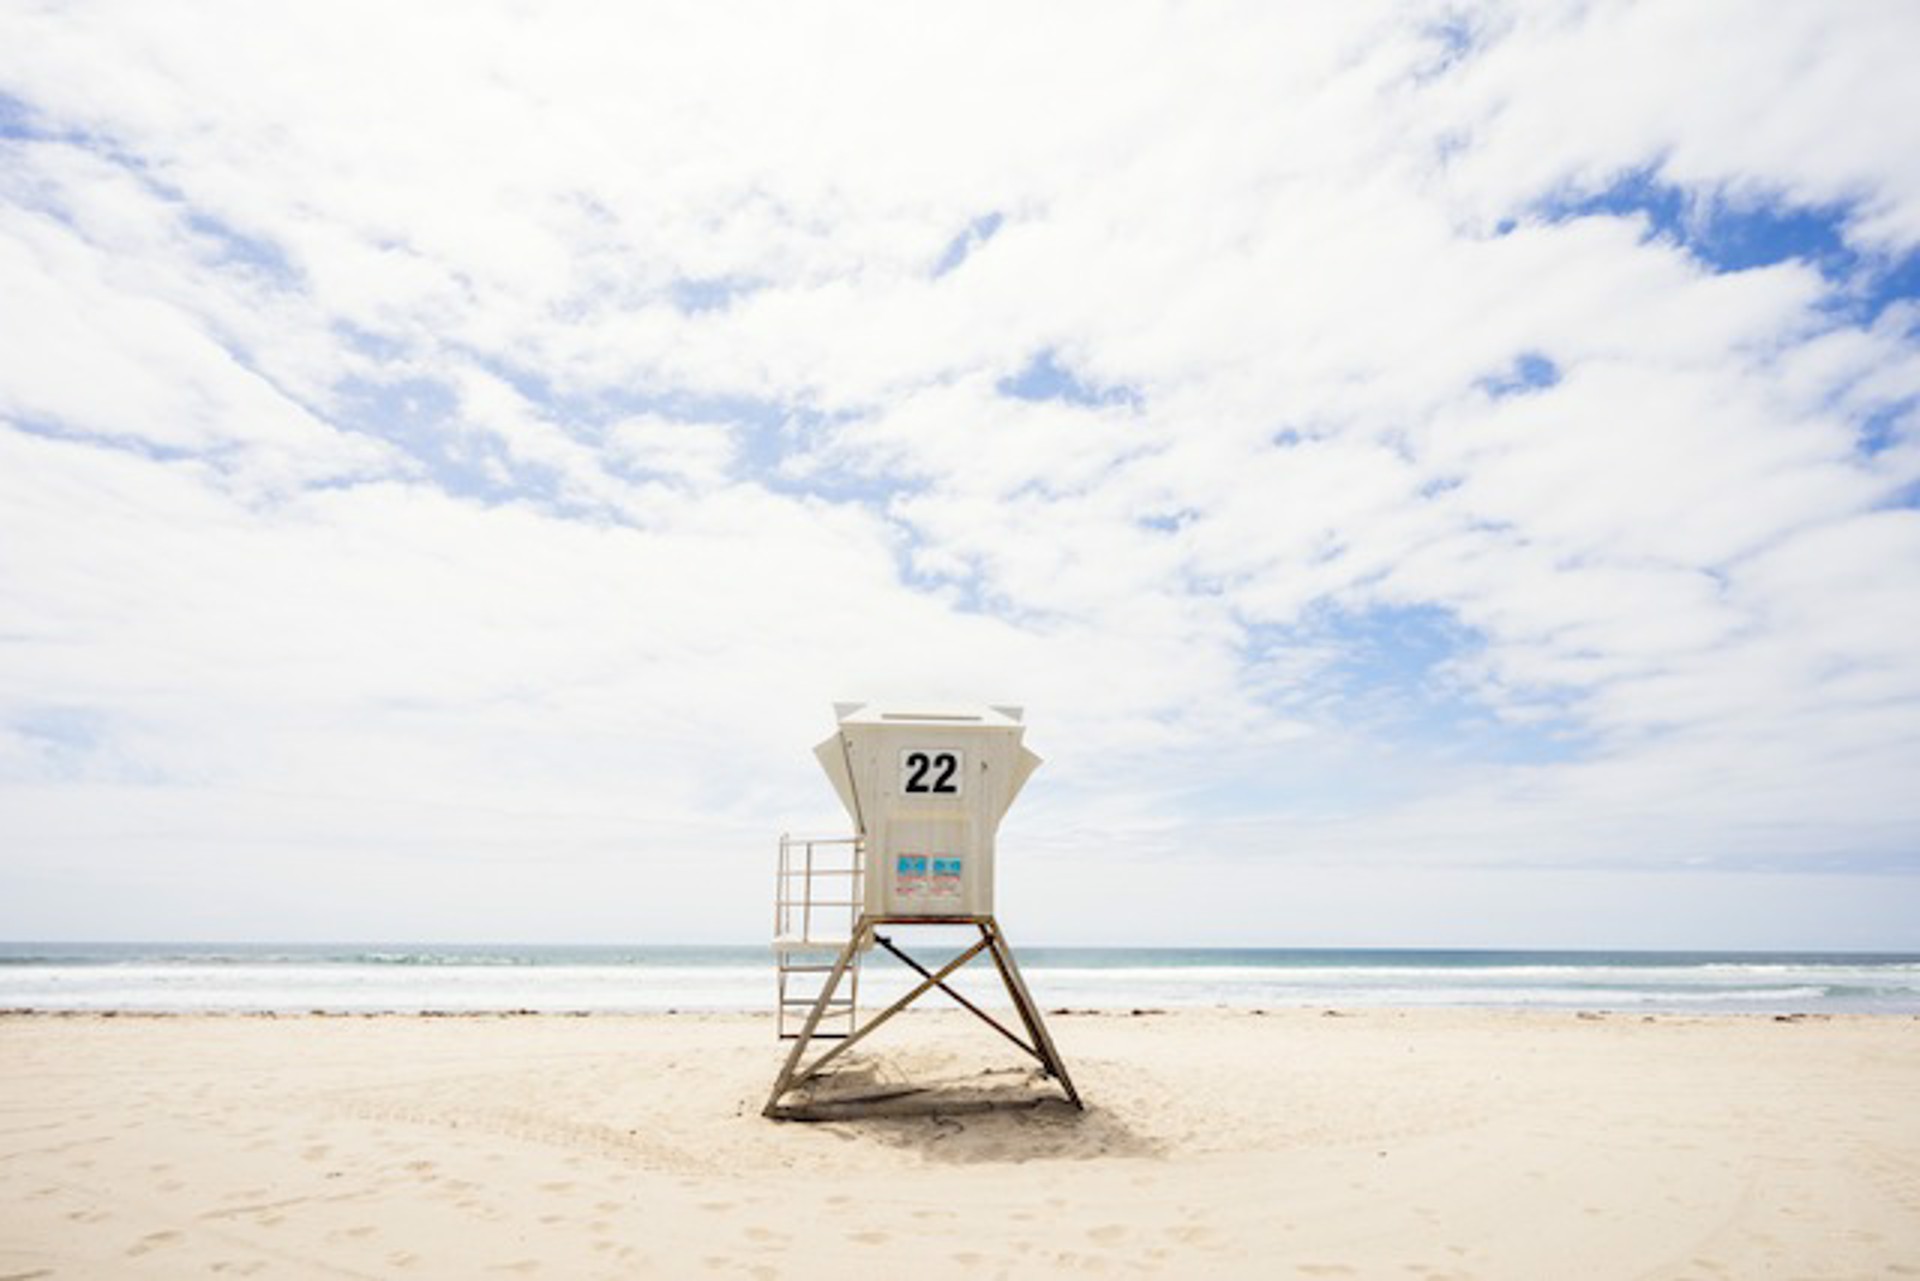 22 Lifeguard Stand by Peter Mendelson